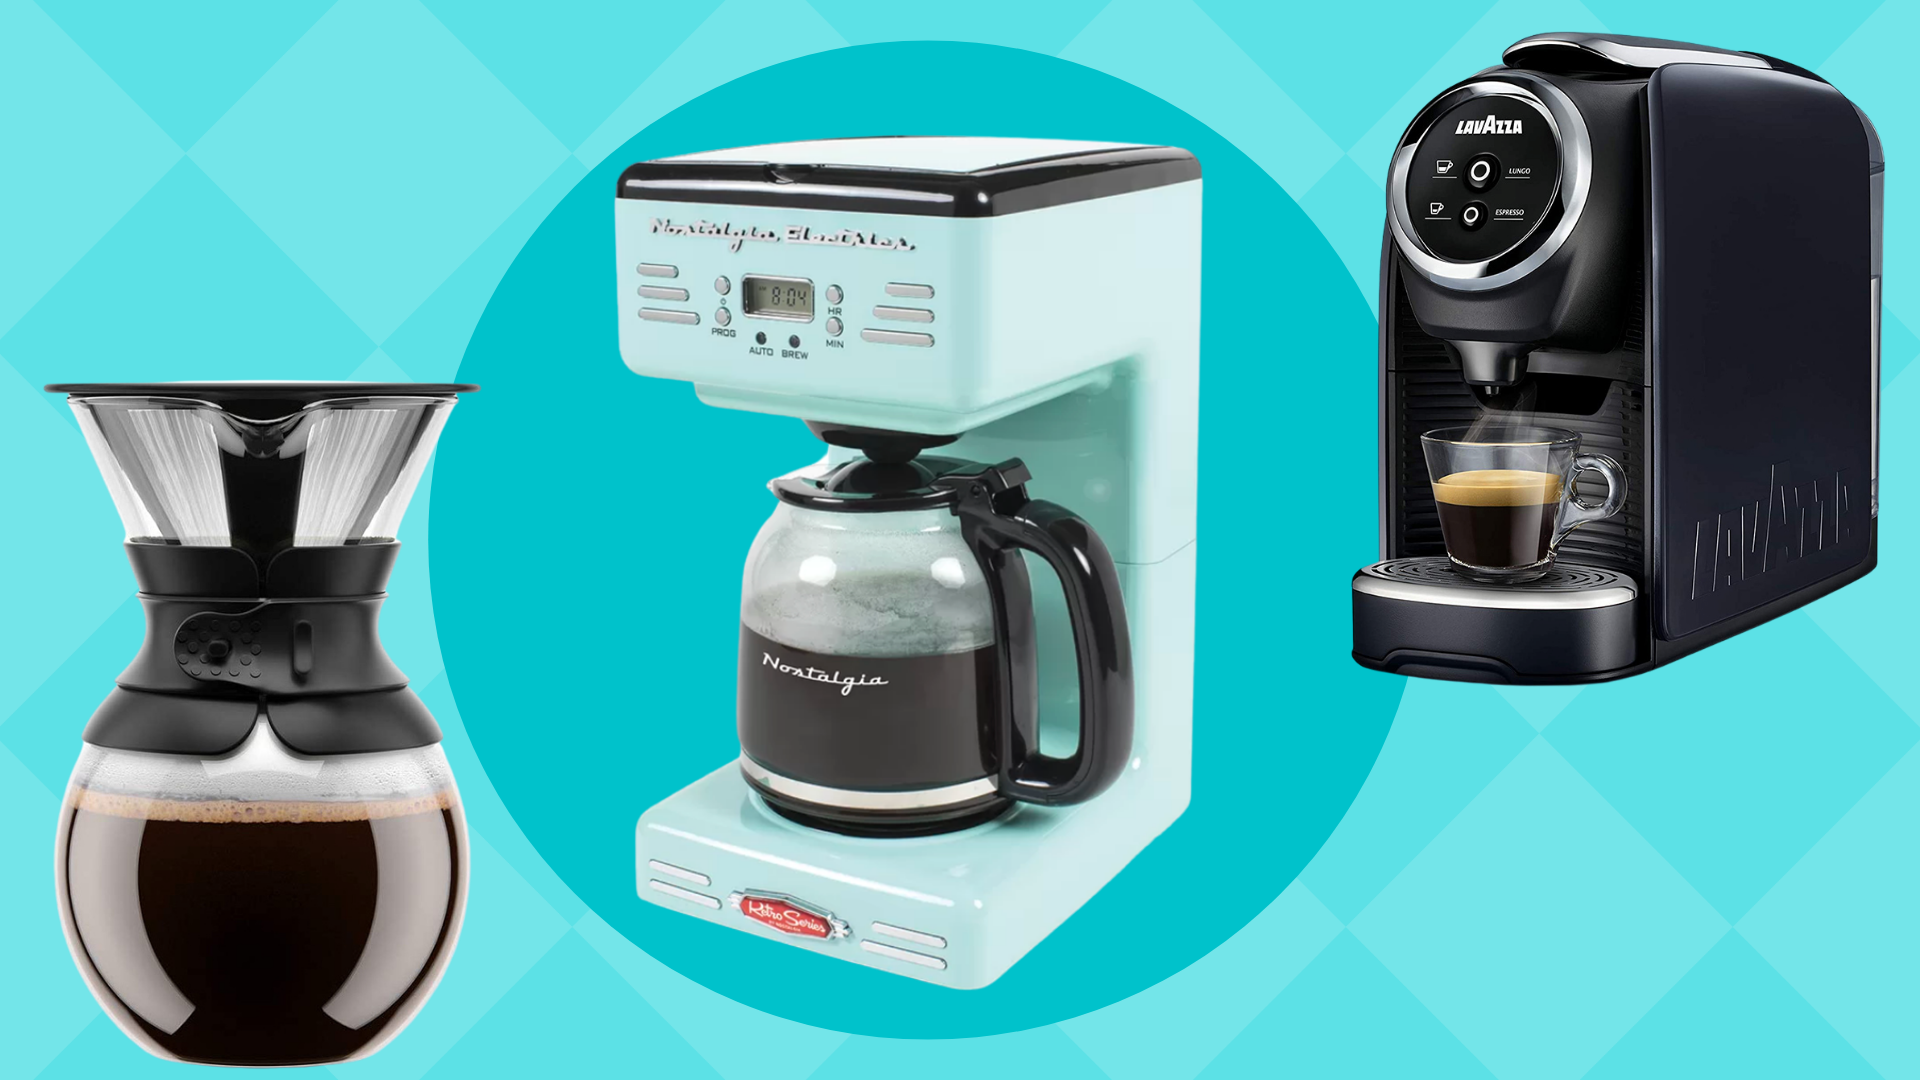 https://www.womansworld.com/wp-content/uploads/2020/08/best-coffee-makers.png